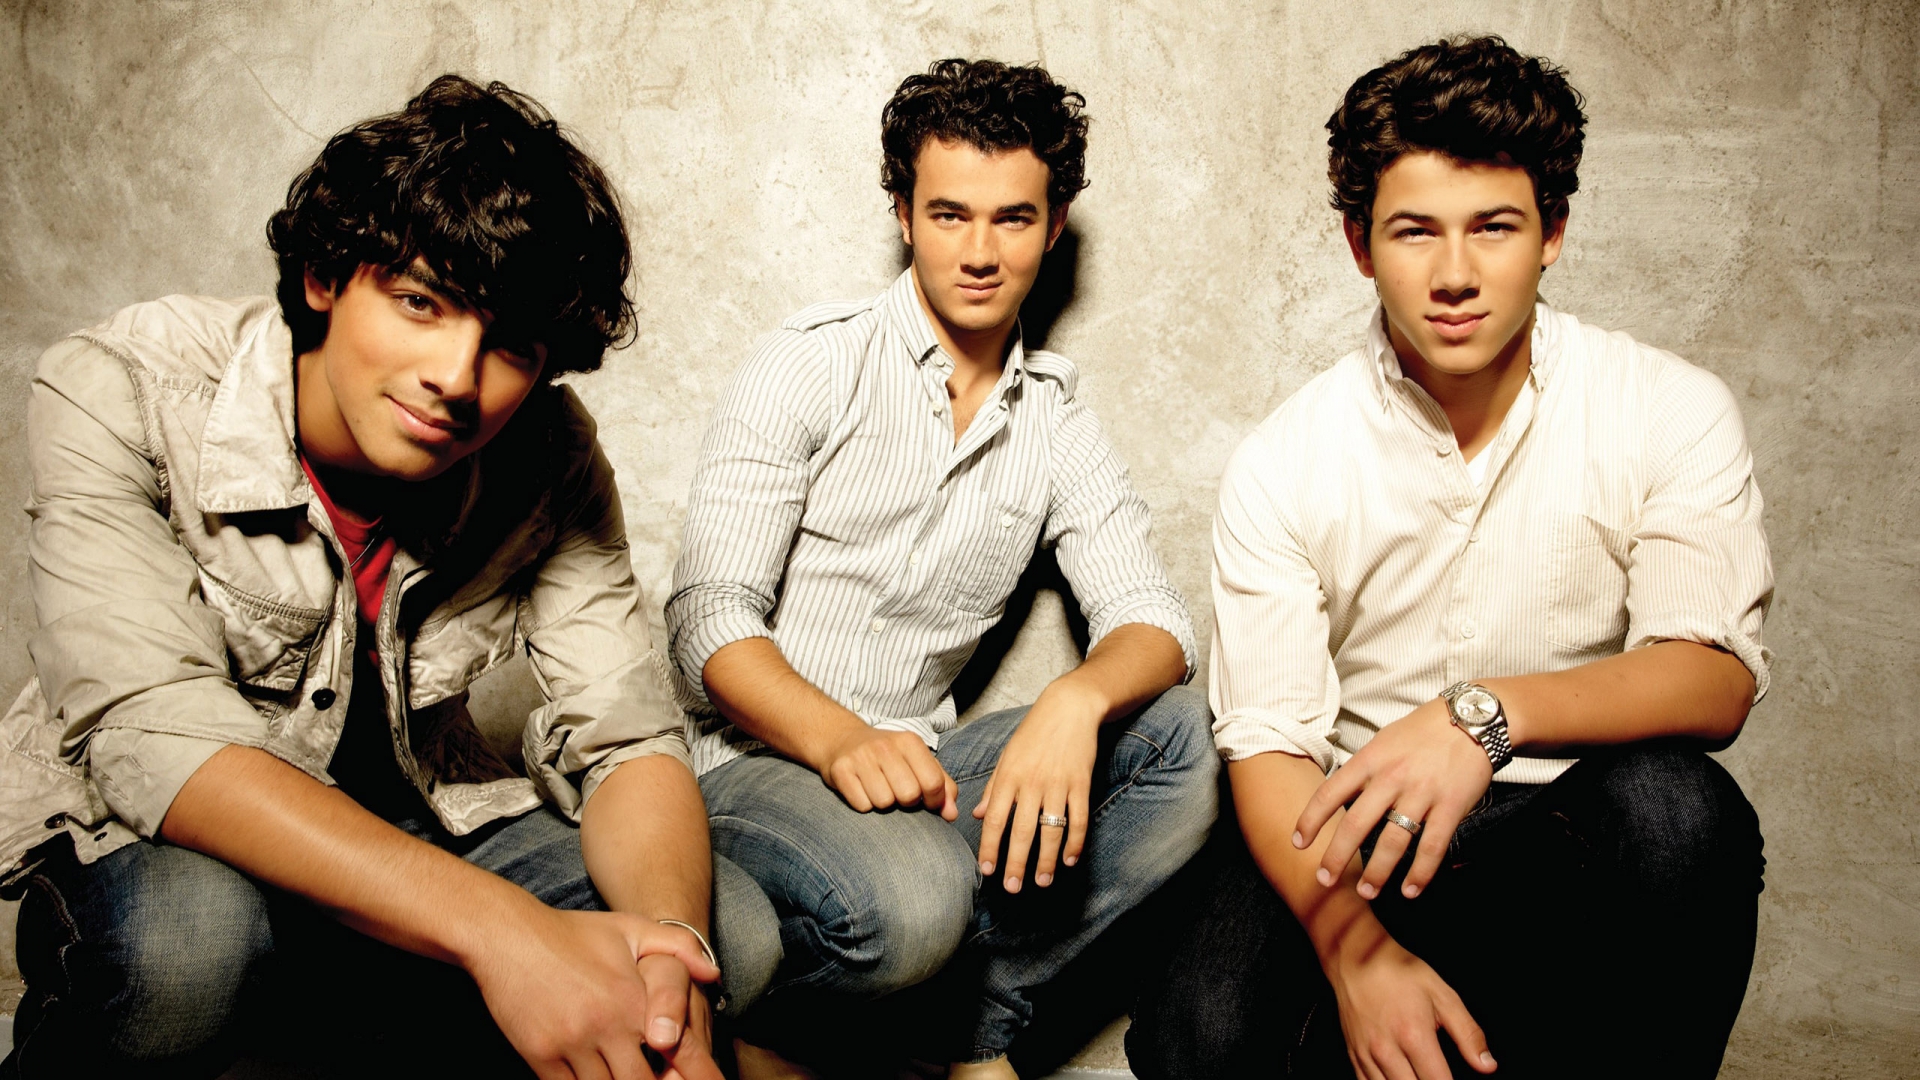 Cool Jonas Brothers for 1920 x 1080 HDTV 1080p resolution